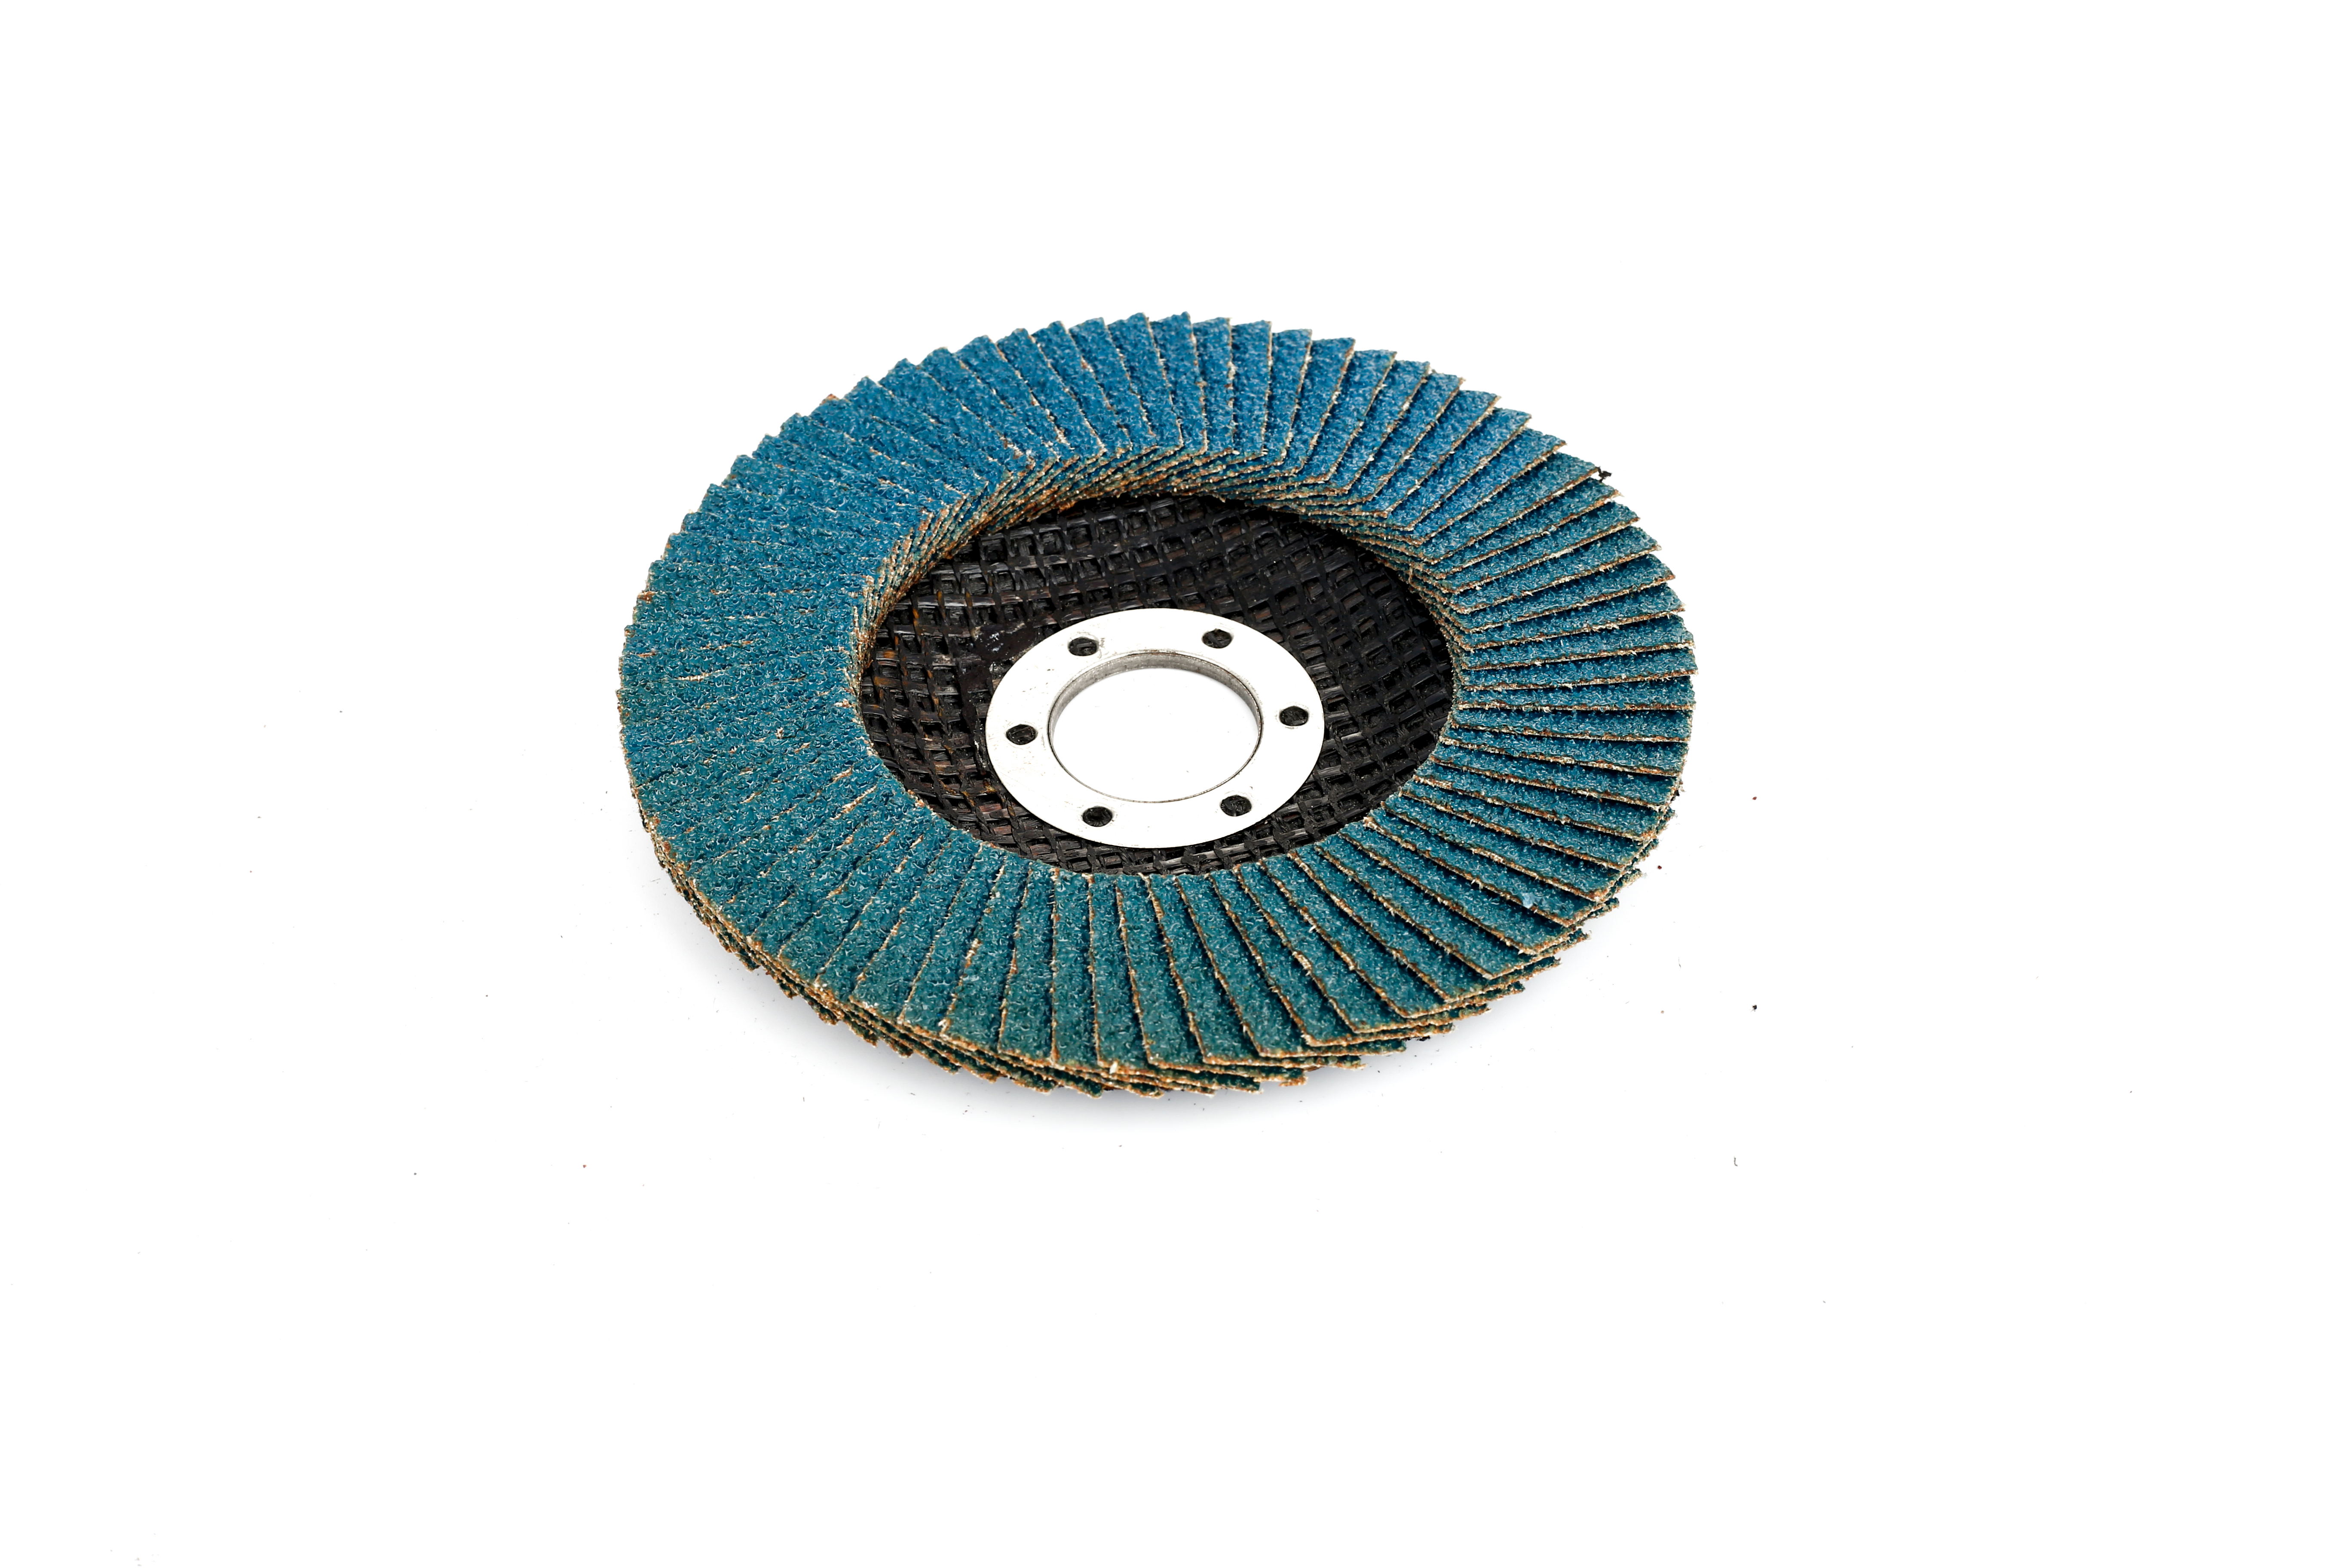 Tungsten Carbide Blue Flap Disc with High Density